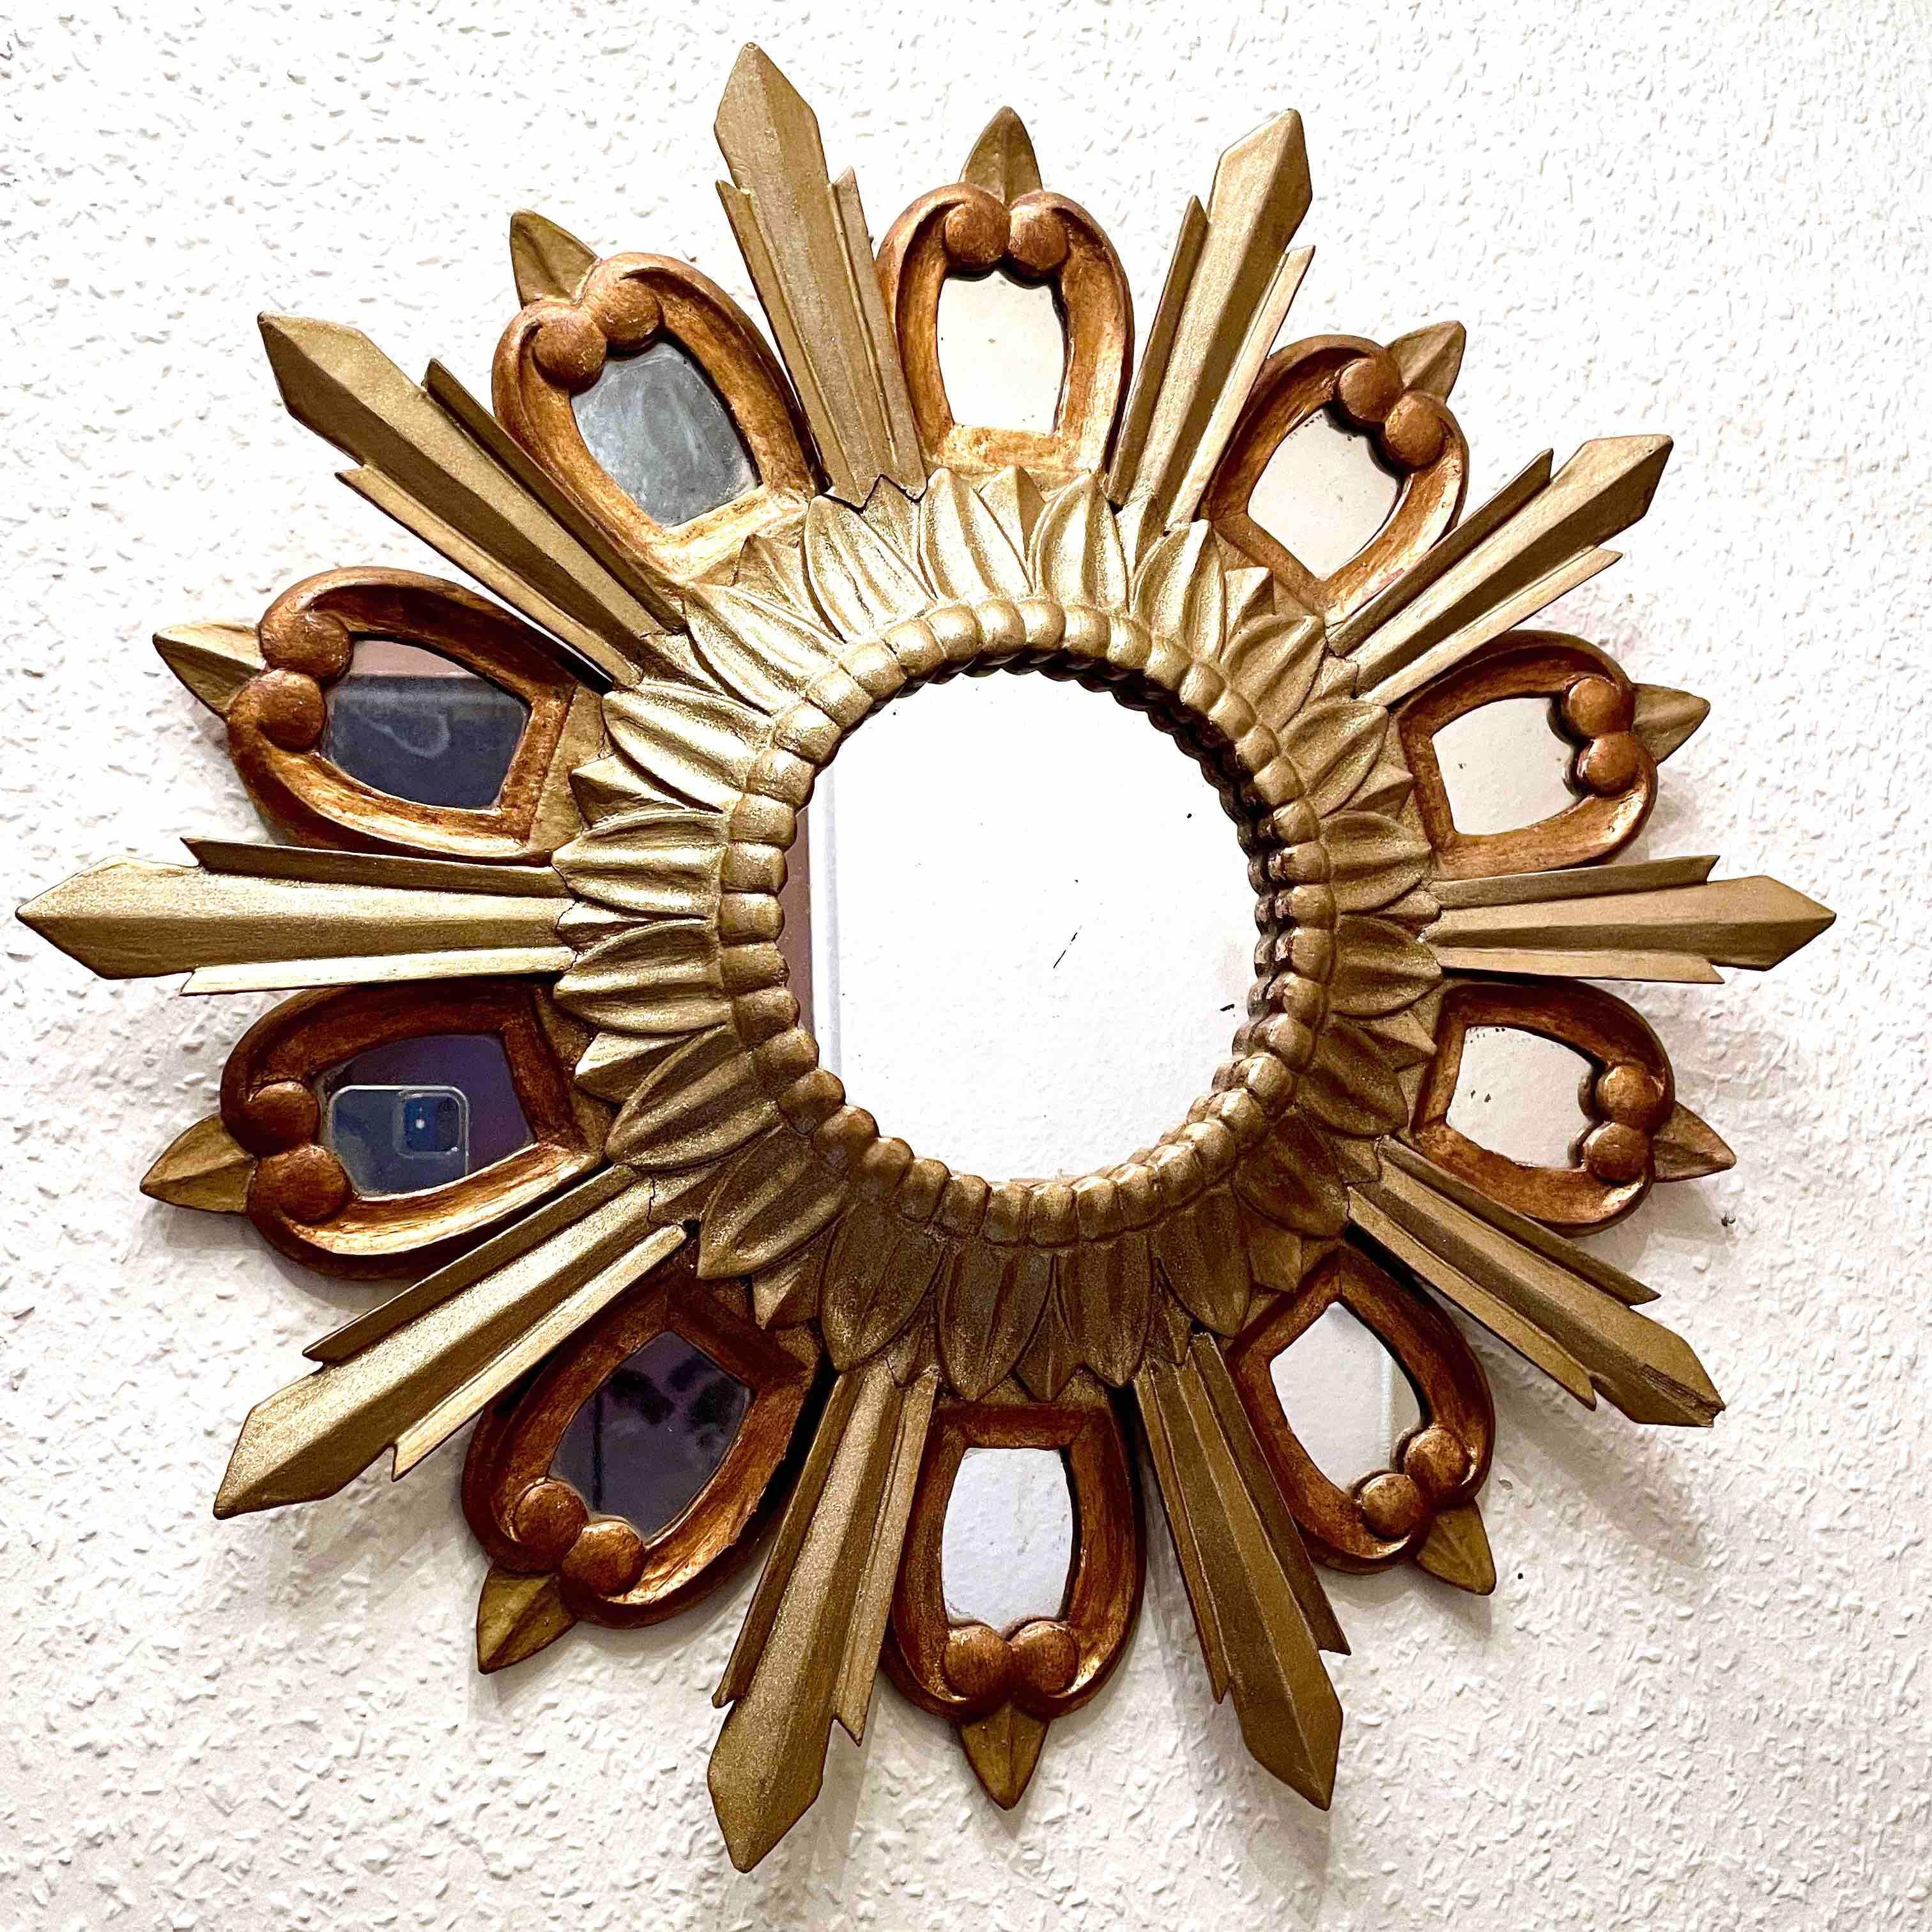 A gorgeous starburst mirror. Made of gilded wood. No chips, no cracks, no repairs. It measures approximate: 21